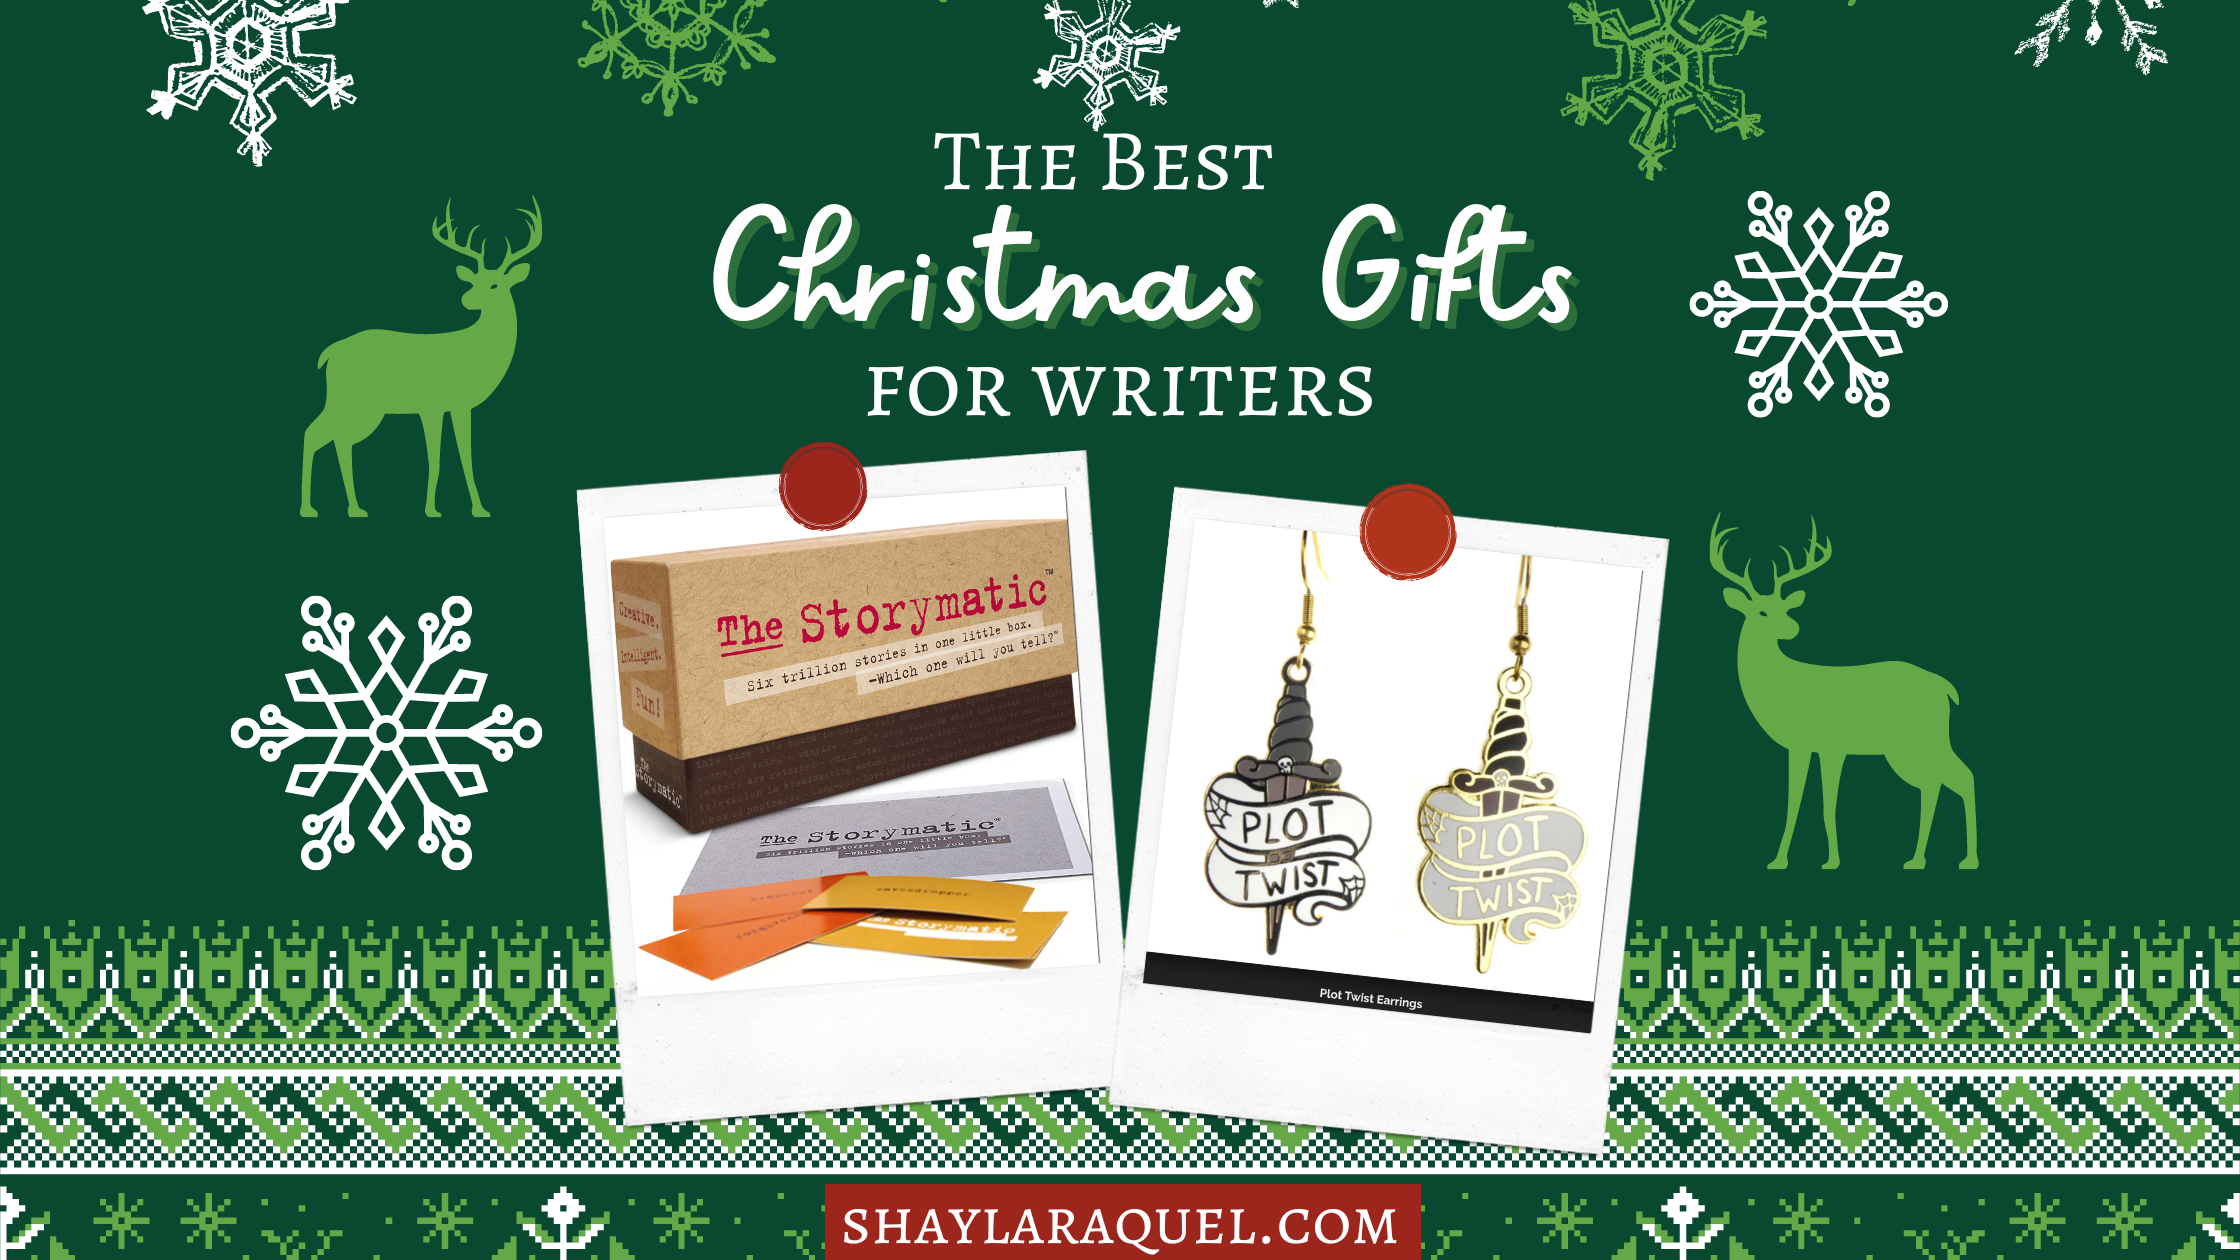 Gift Guide: 10 Digital Christmas Gifts for Writers - Helping